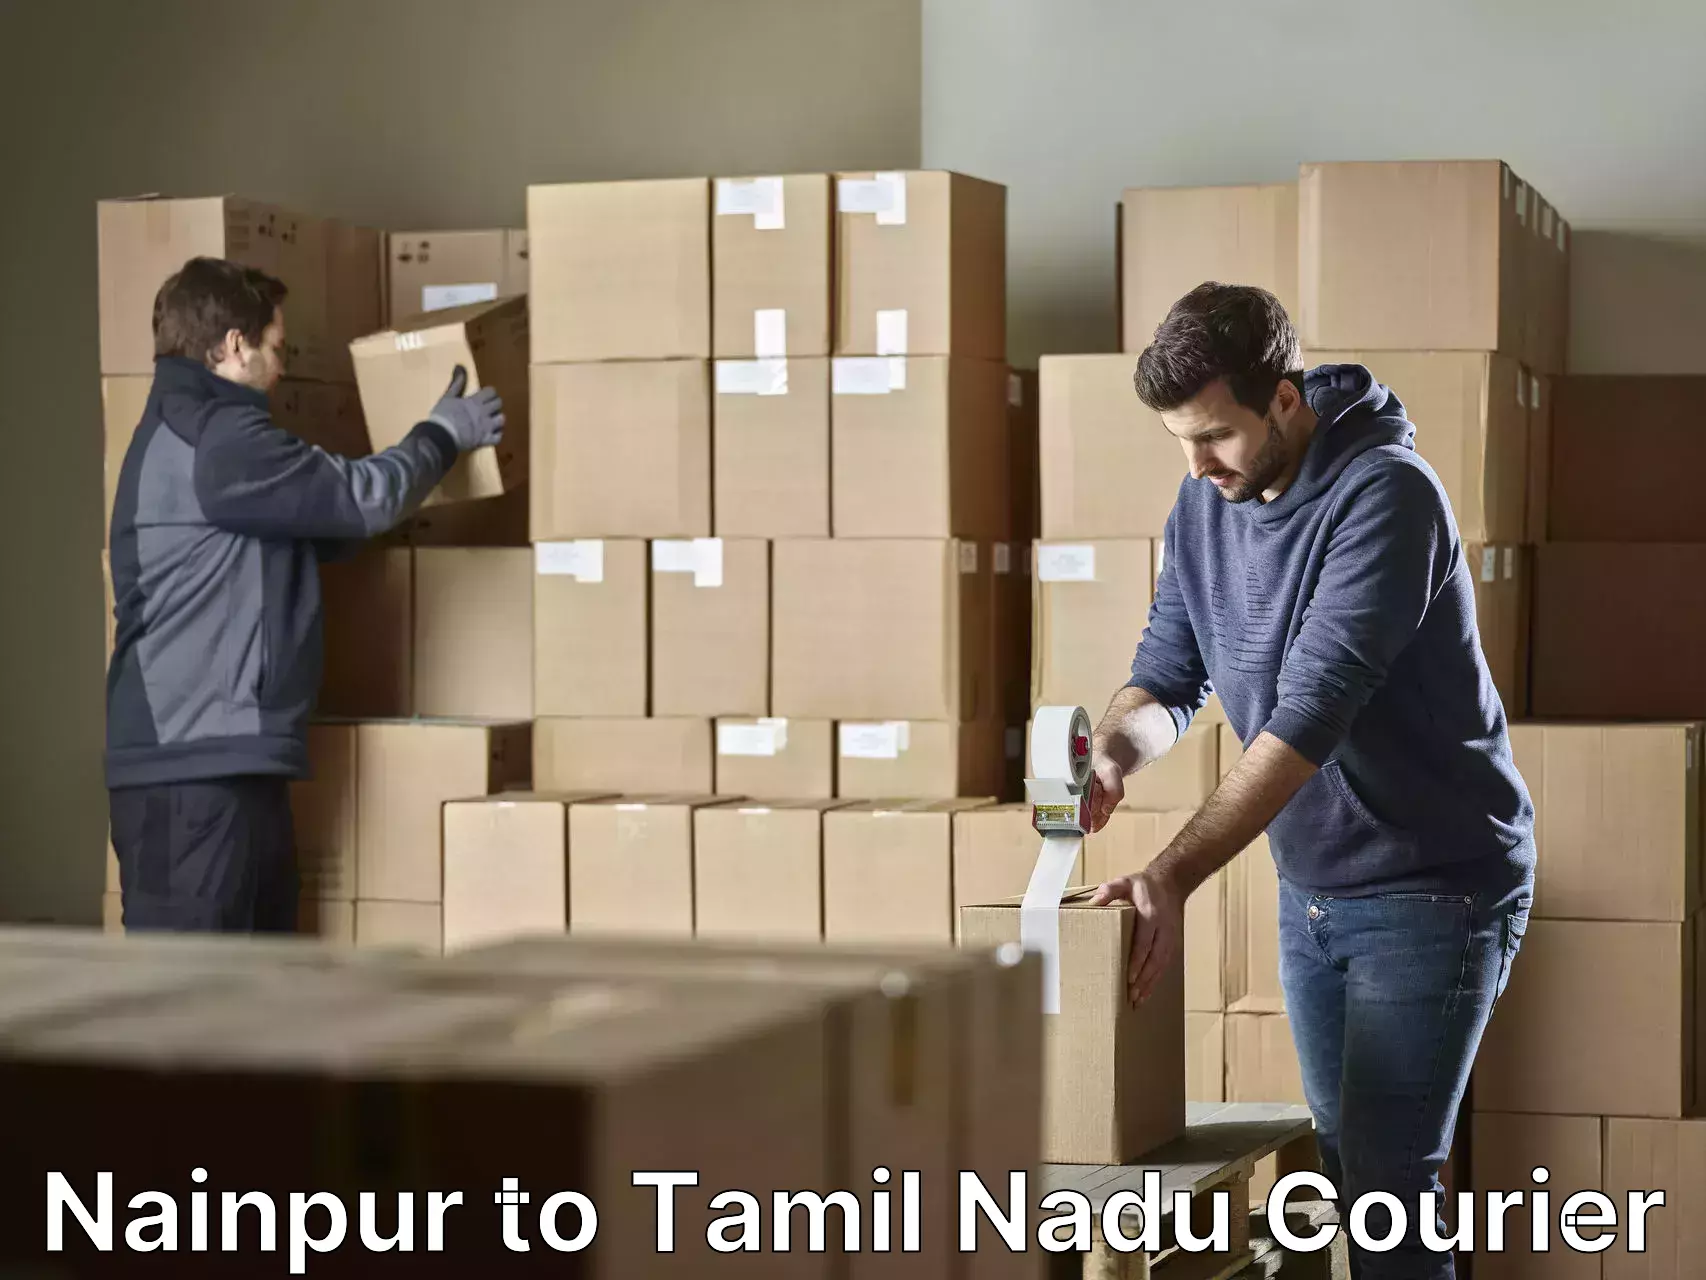 Furniture delivery service Nainpur to Tamil Nadu